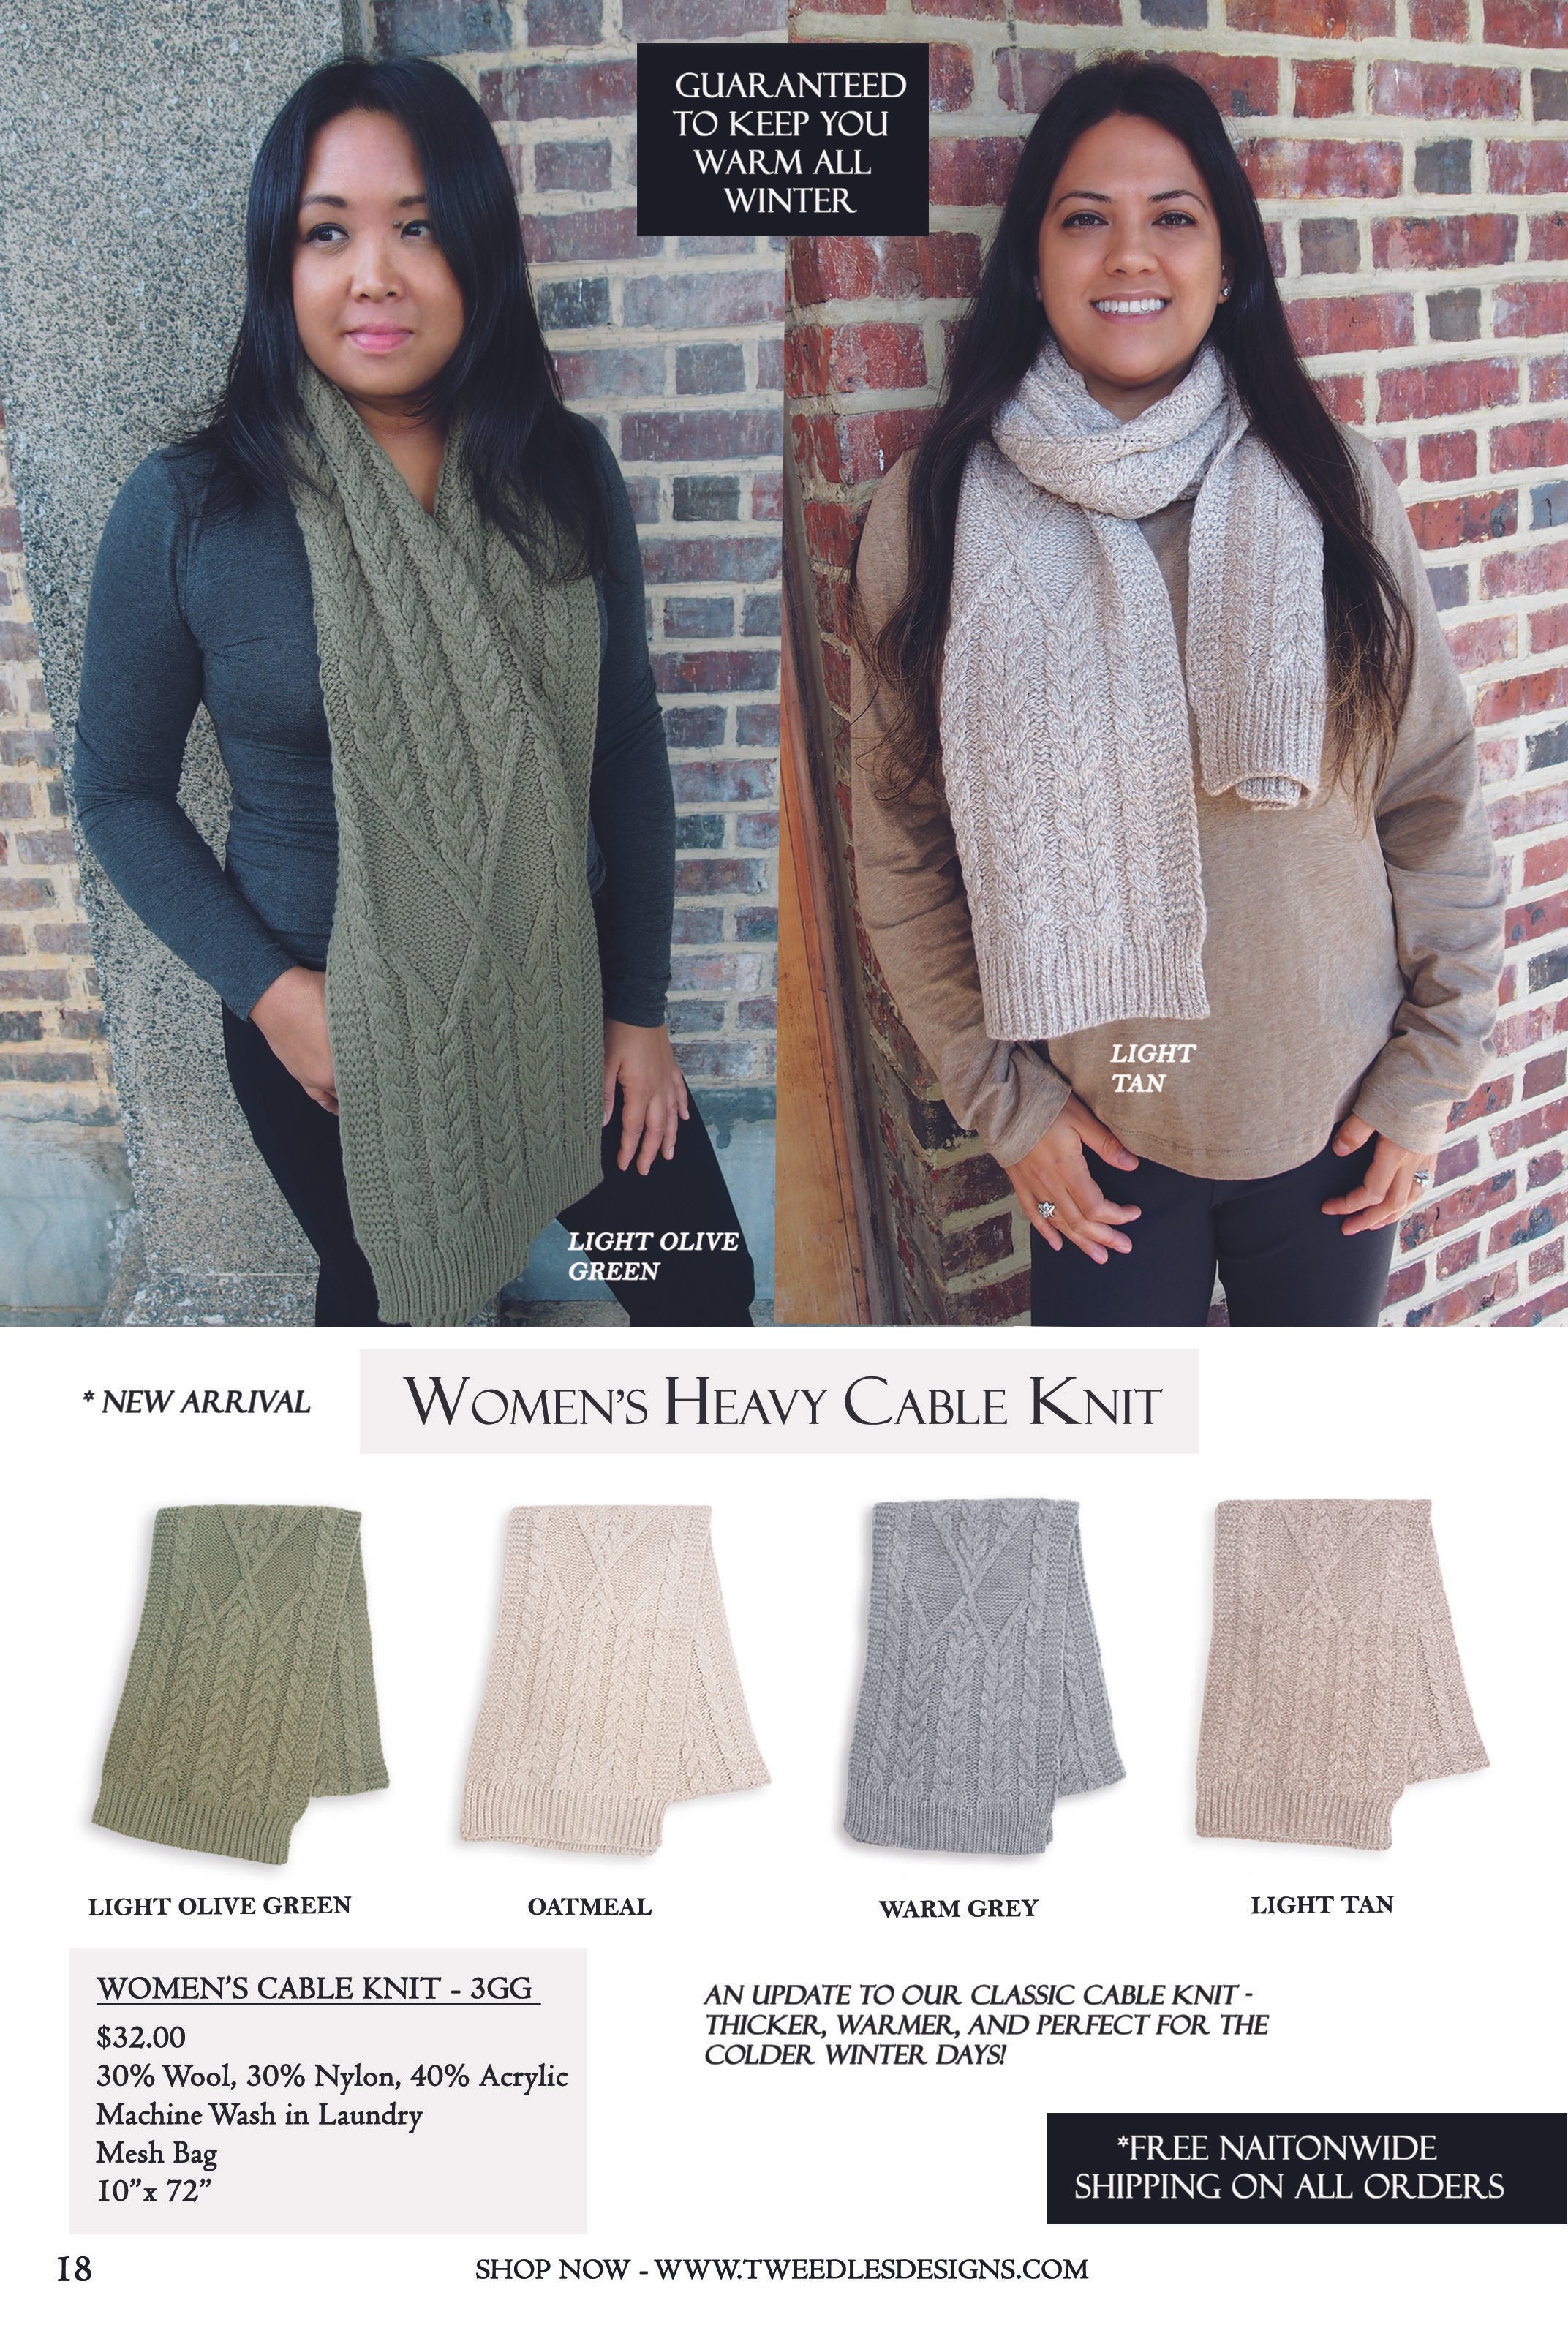 Catalog 2023 - Page 18 - (Women's Cable Knit 2023).jpg